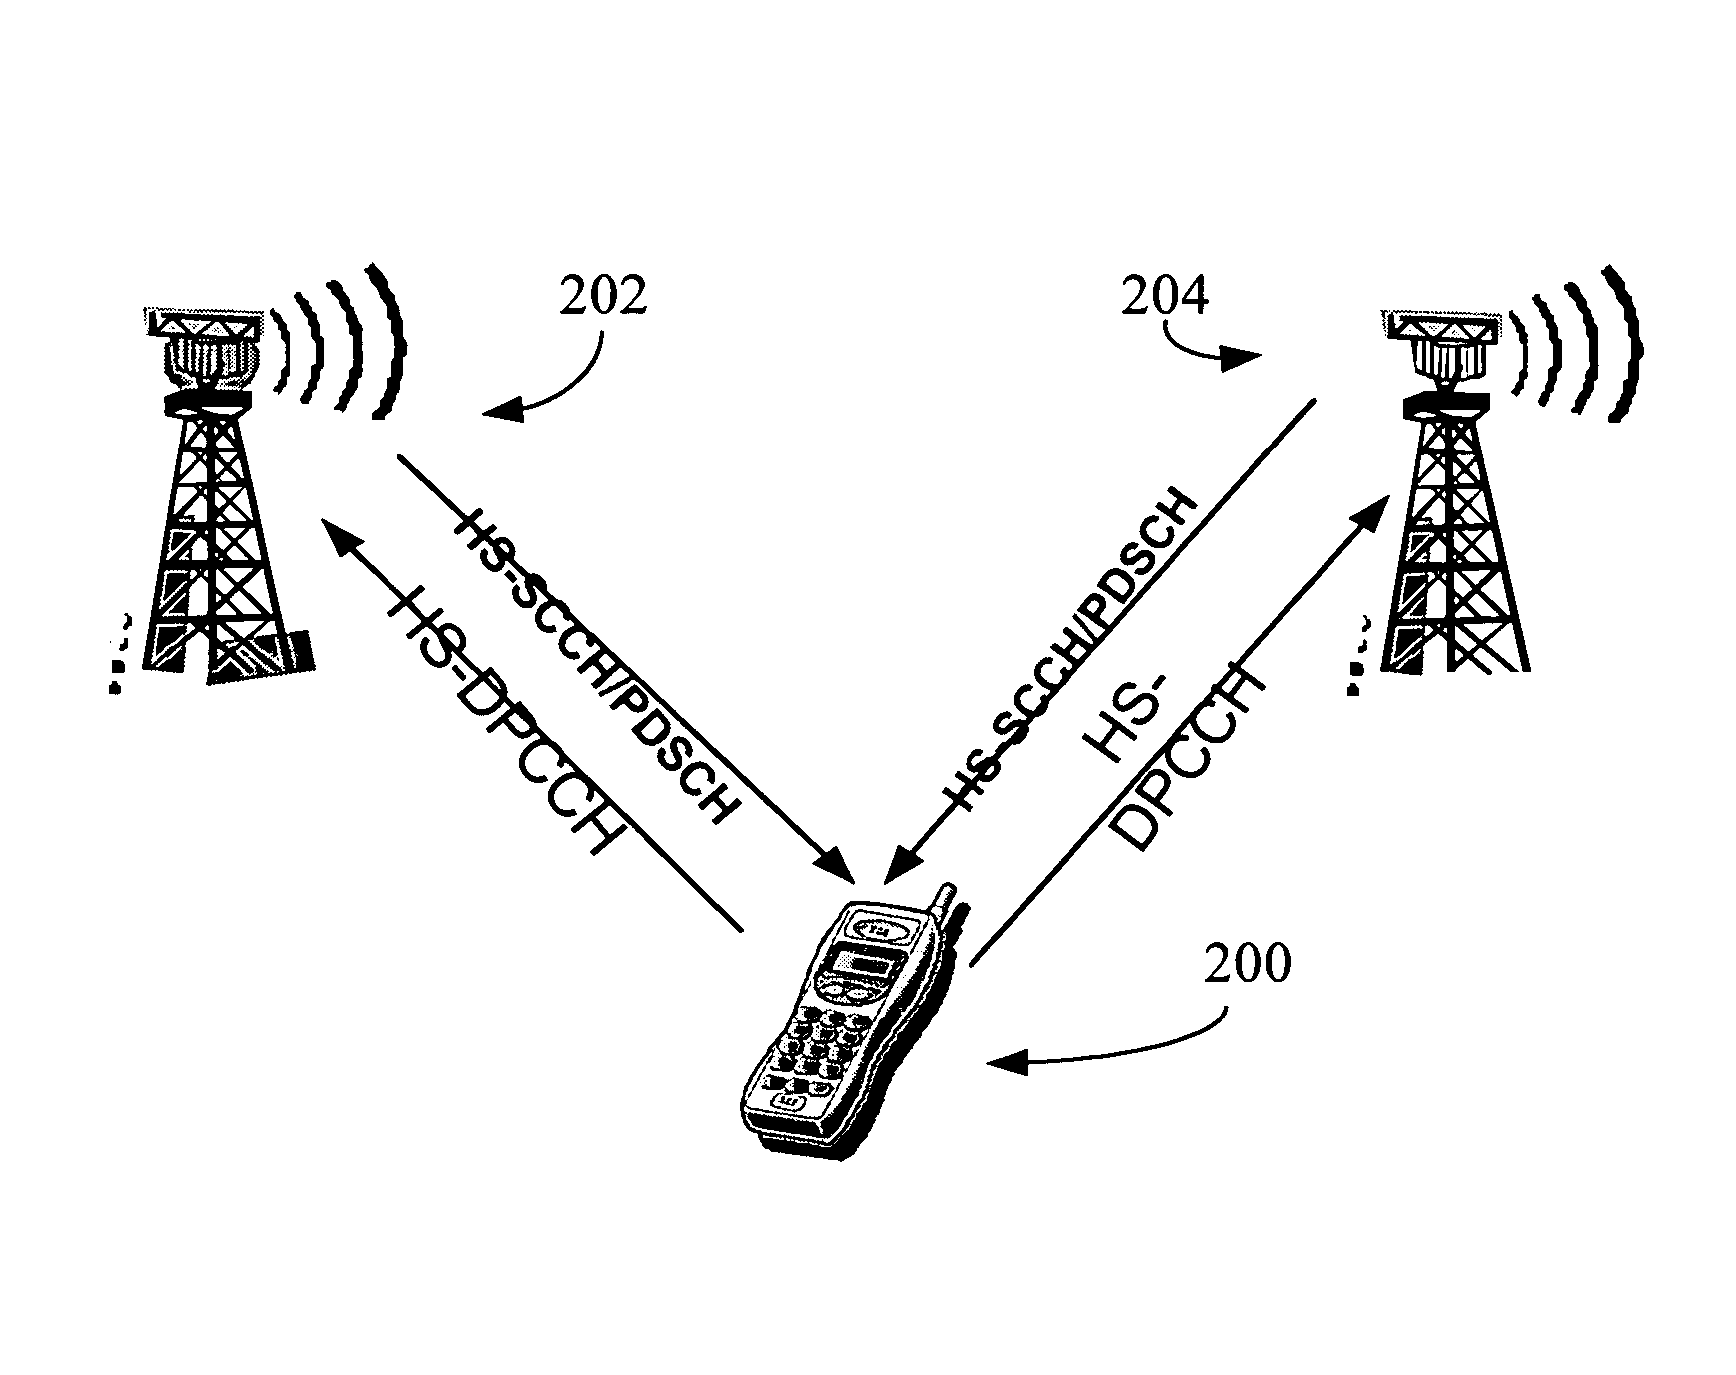 Cell switching and packet combining in a wireless communication system